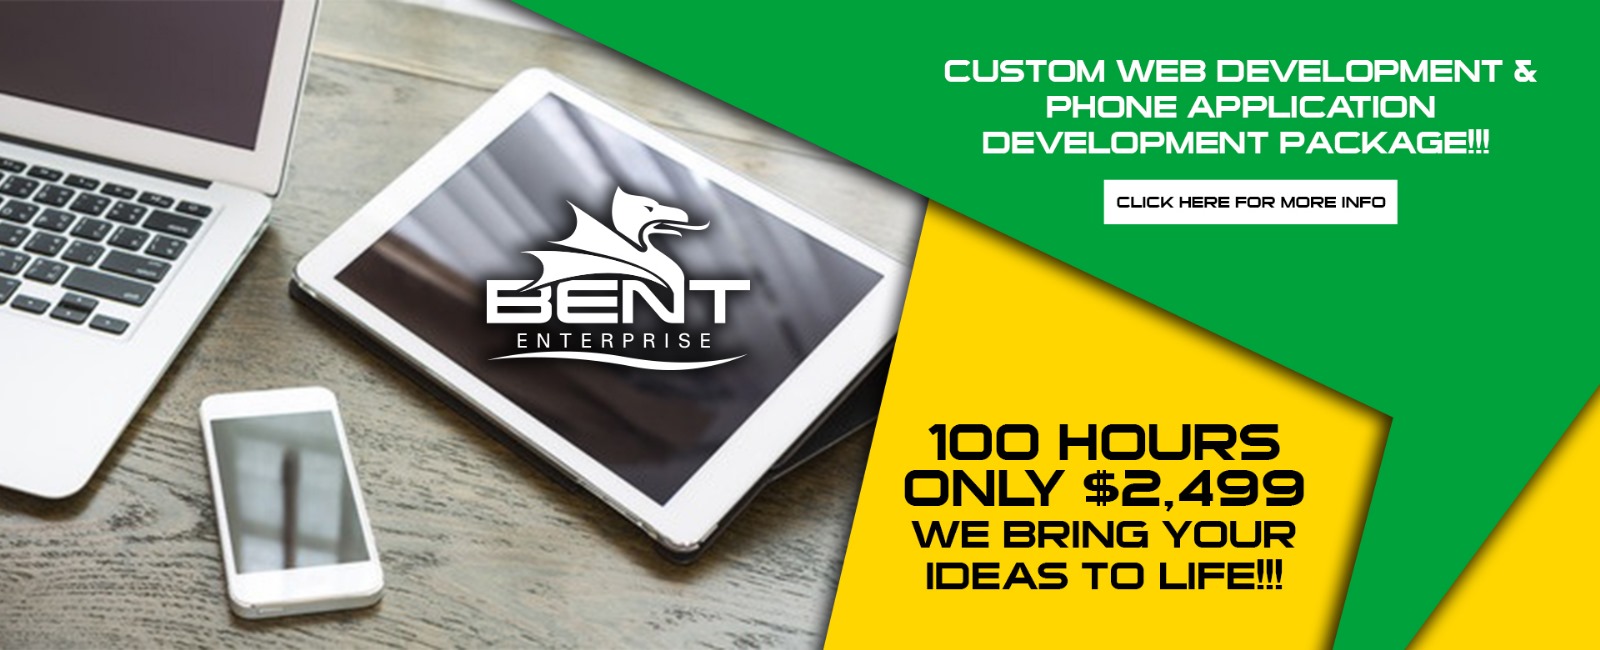 Web Development package 100 hours @ only $2,499 USD